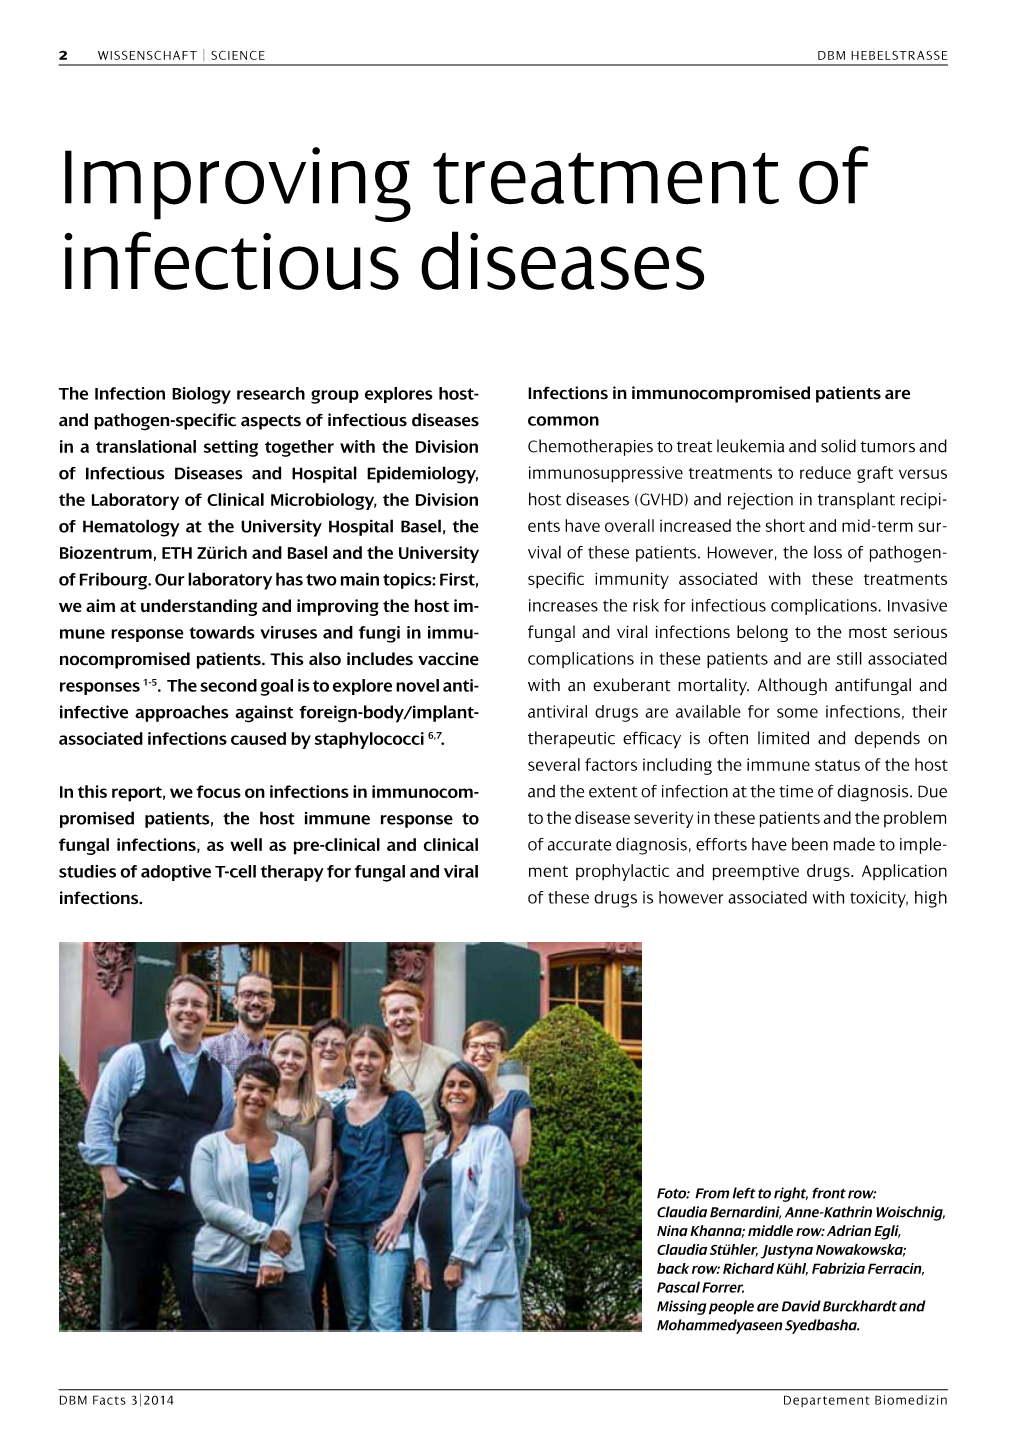 Improving Treatment of Infectious Diseases